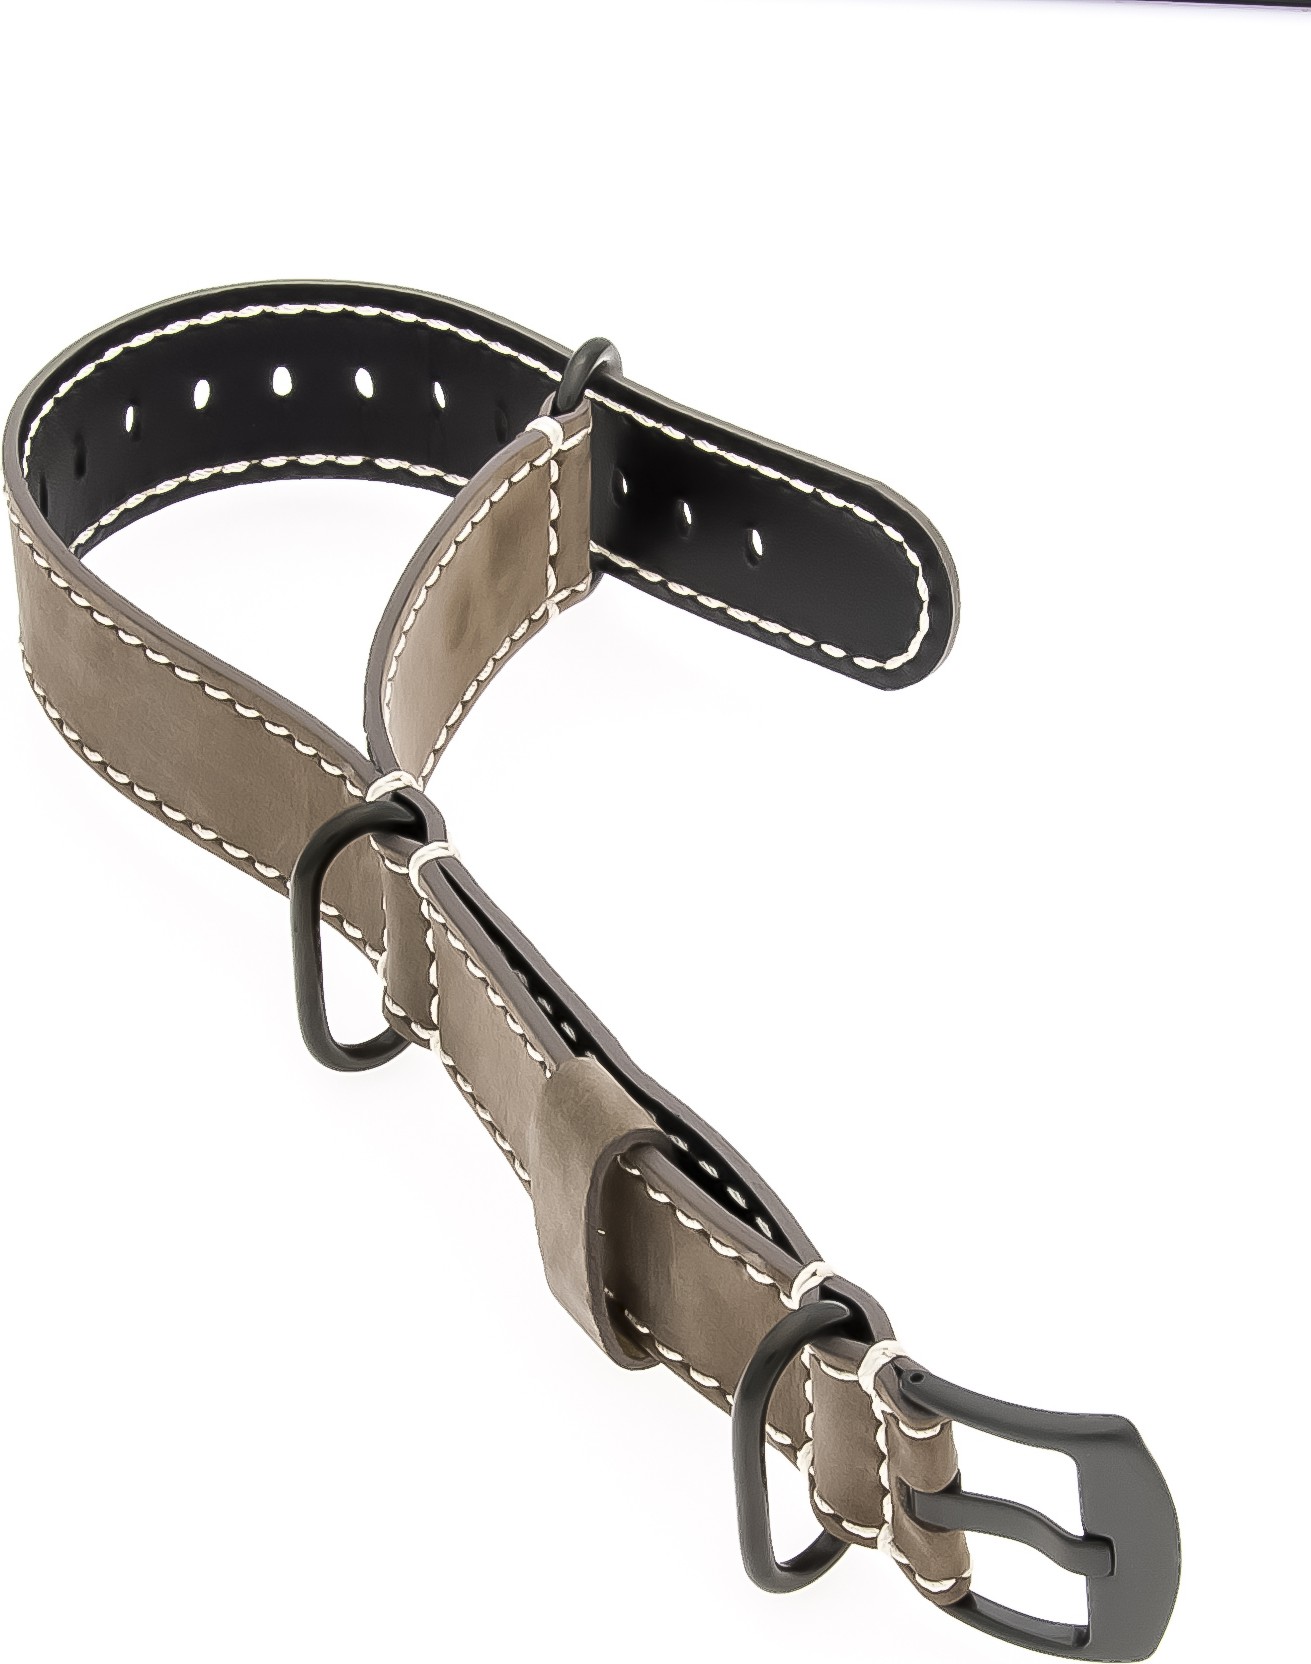  PVD-NATO Watch Strap - Strap - Military - Real Leather - PVD Brown/White 